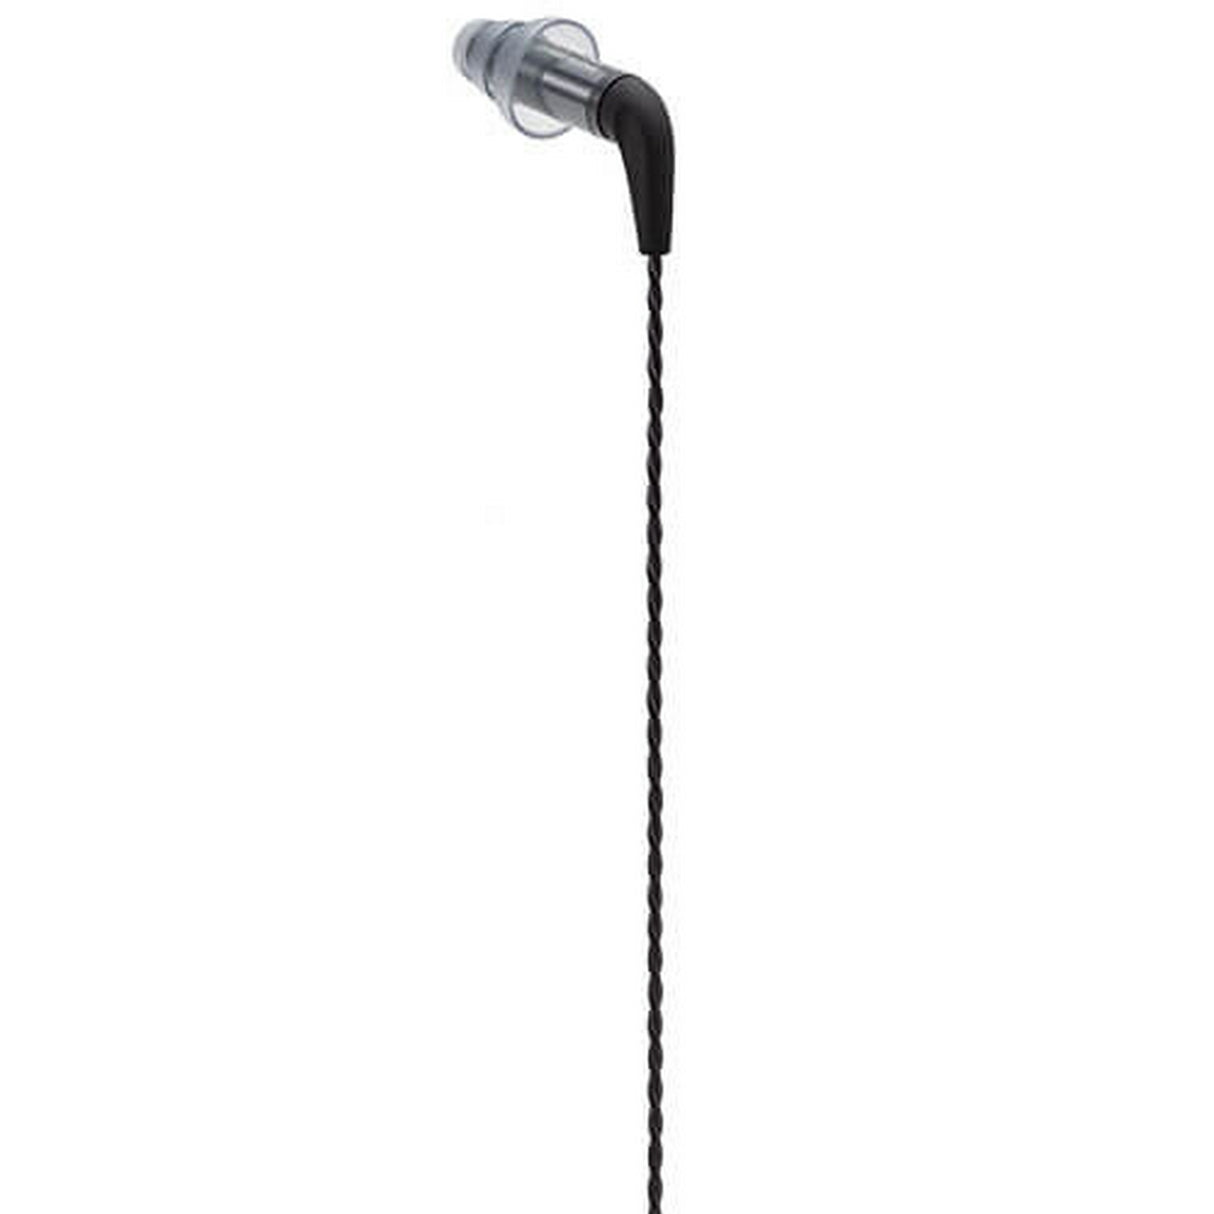 Etymotic Research ER4XR Extended Reference In-Ear Monitor